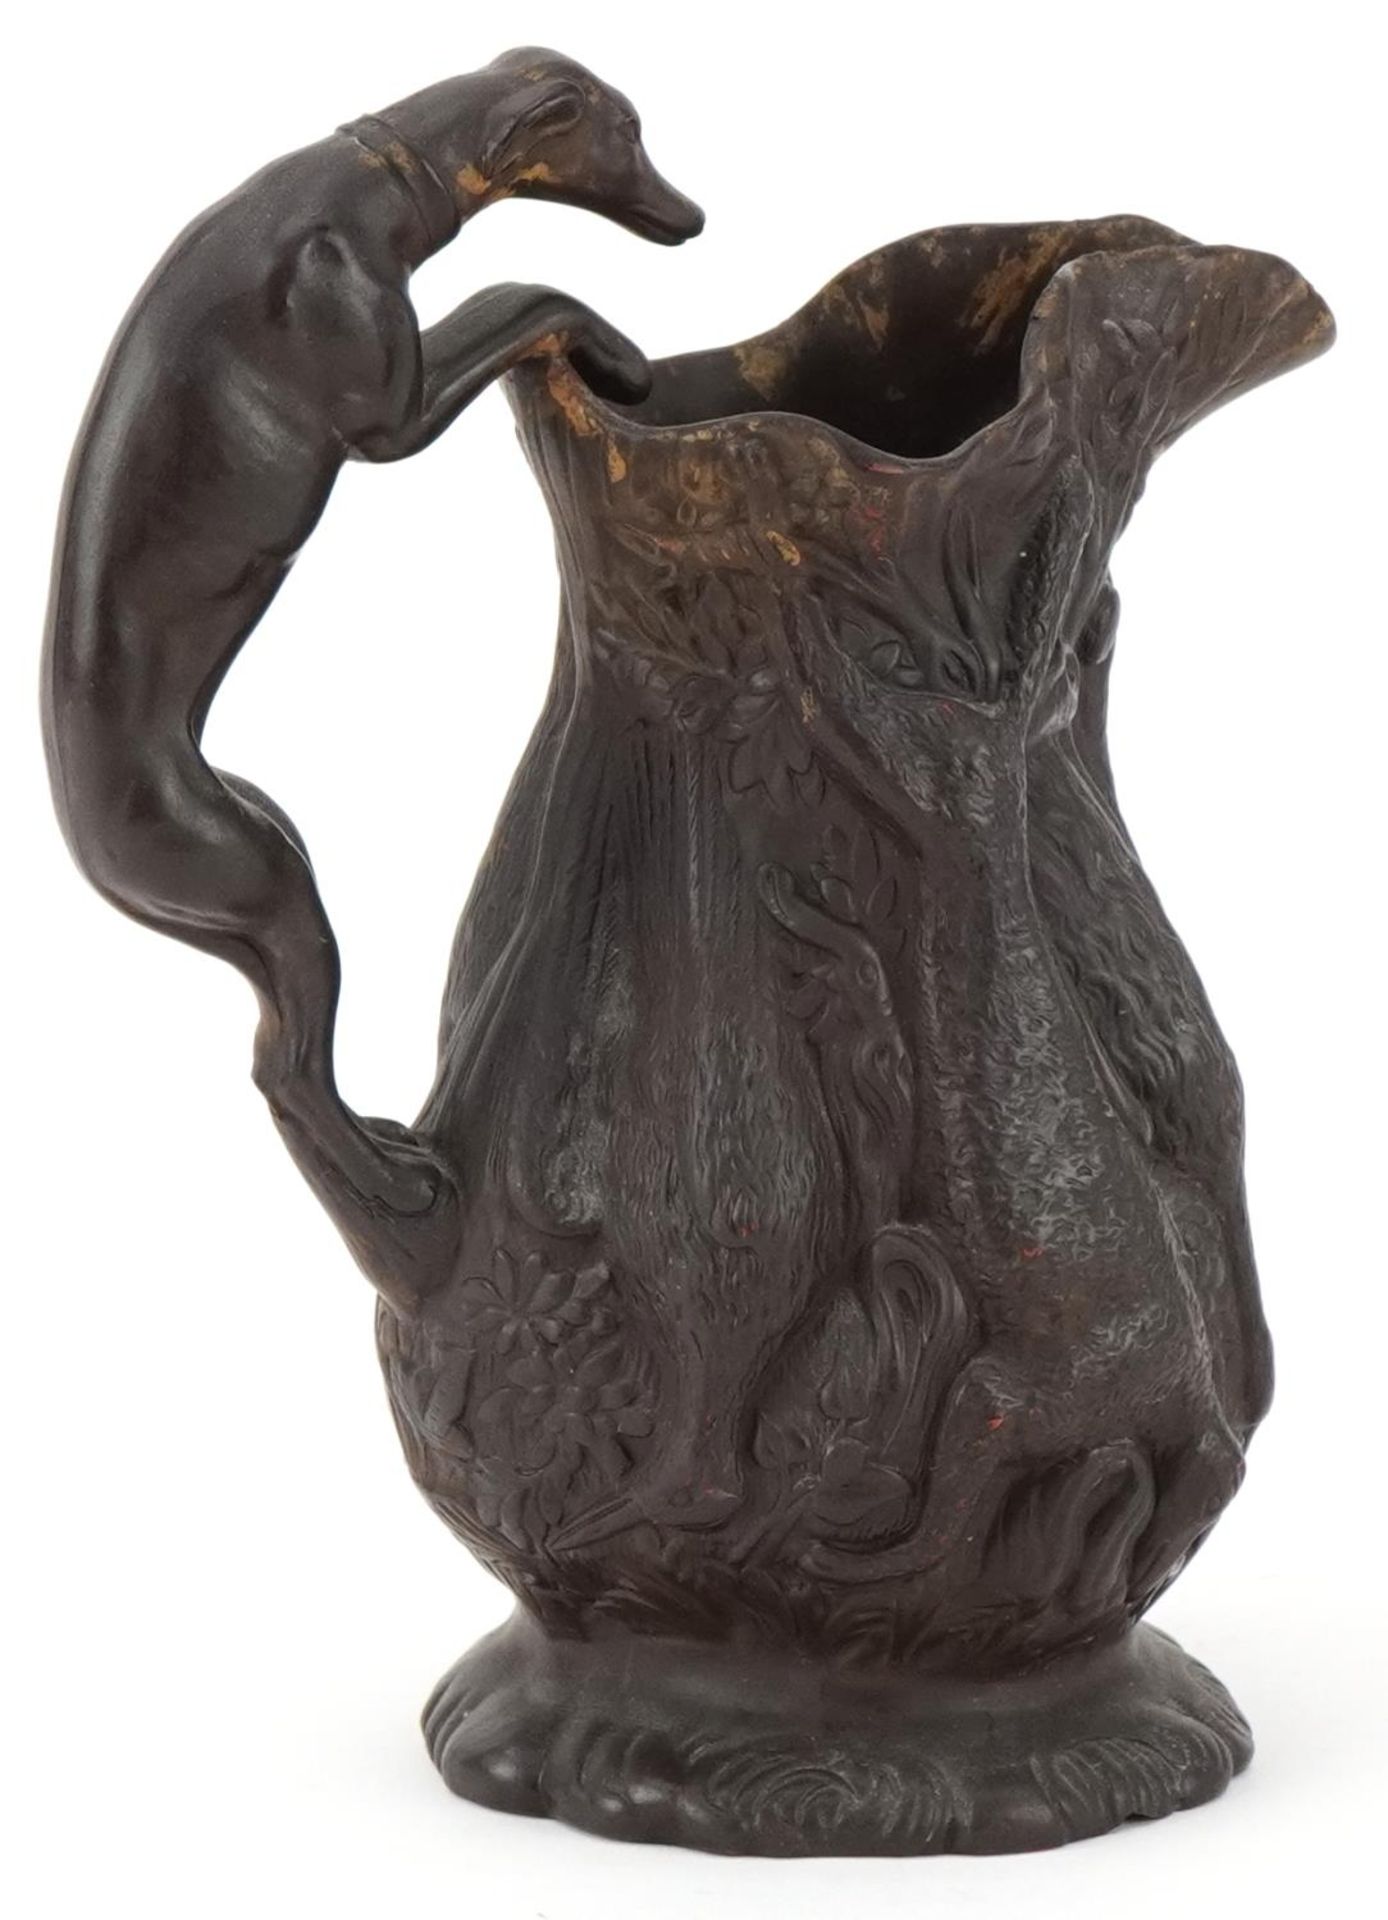 Victorian Wilhelm Schiller & Sons pottery hunting jug with greyhound design handle, 19cm high - Image 5 of 10